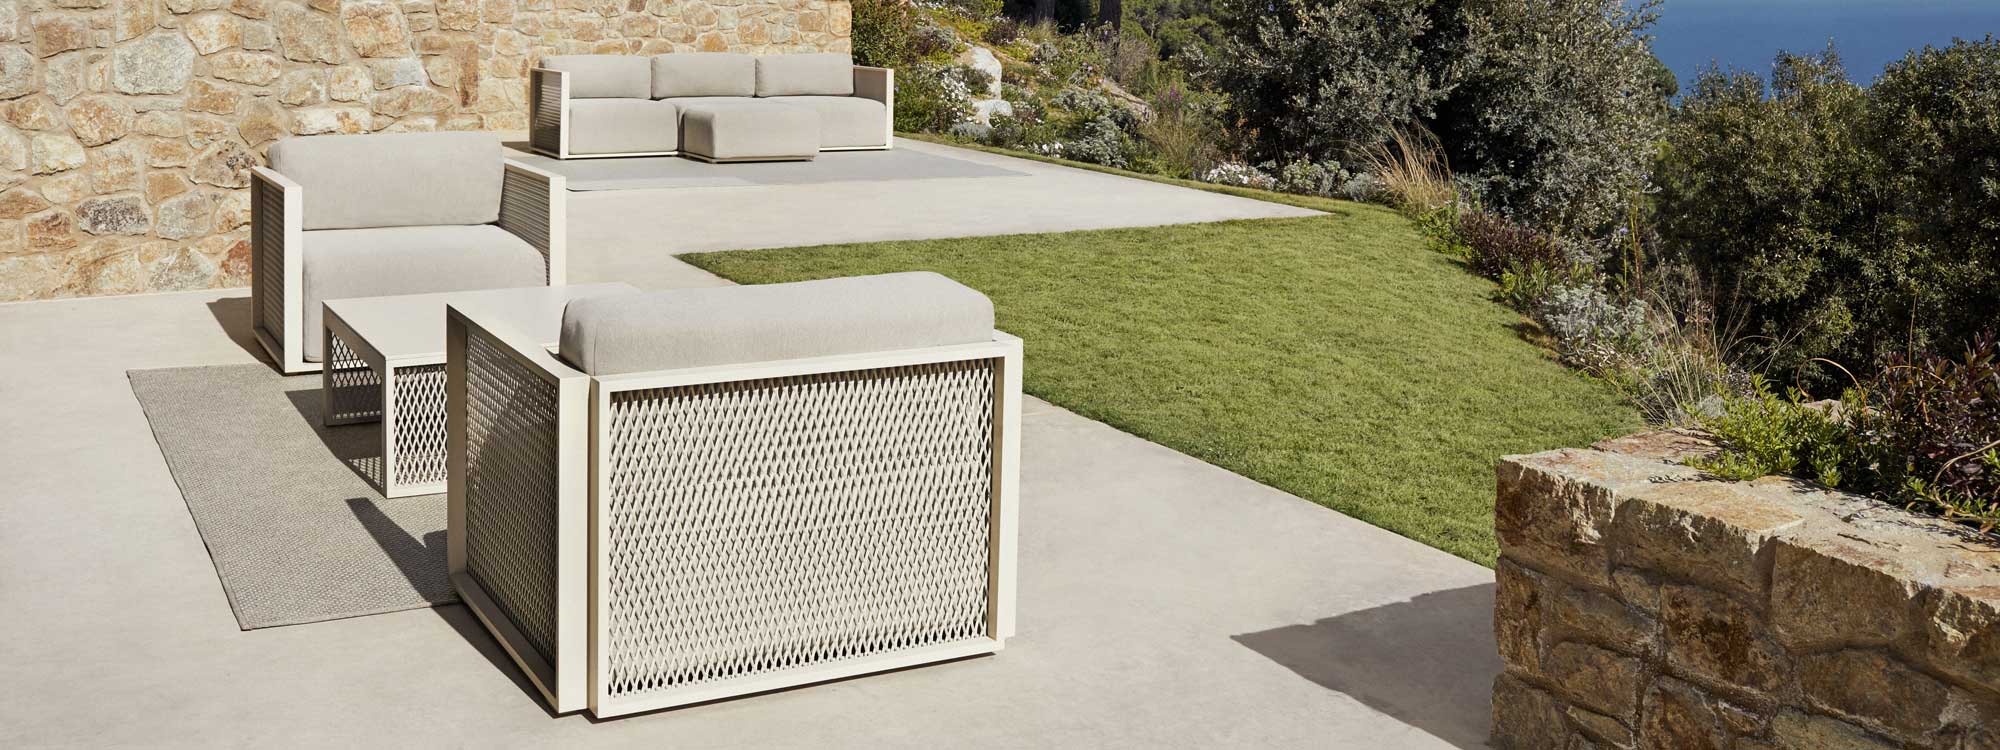 Image of Vondom The Factory white garden sofa and louge chair on sunny Spanish terrace